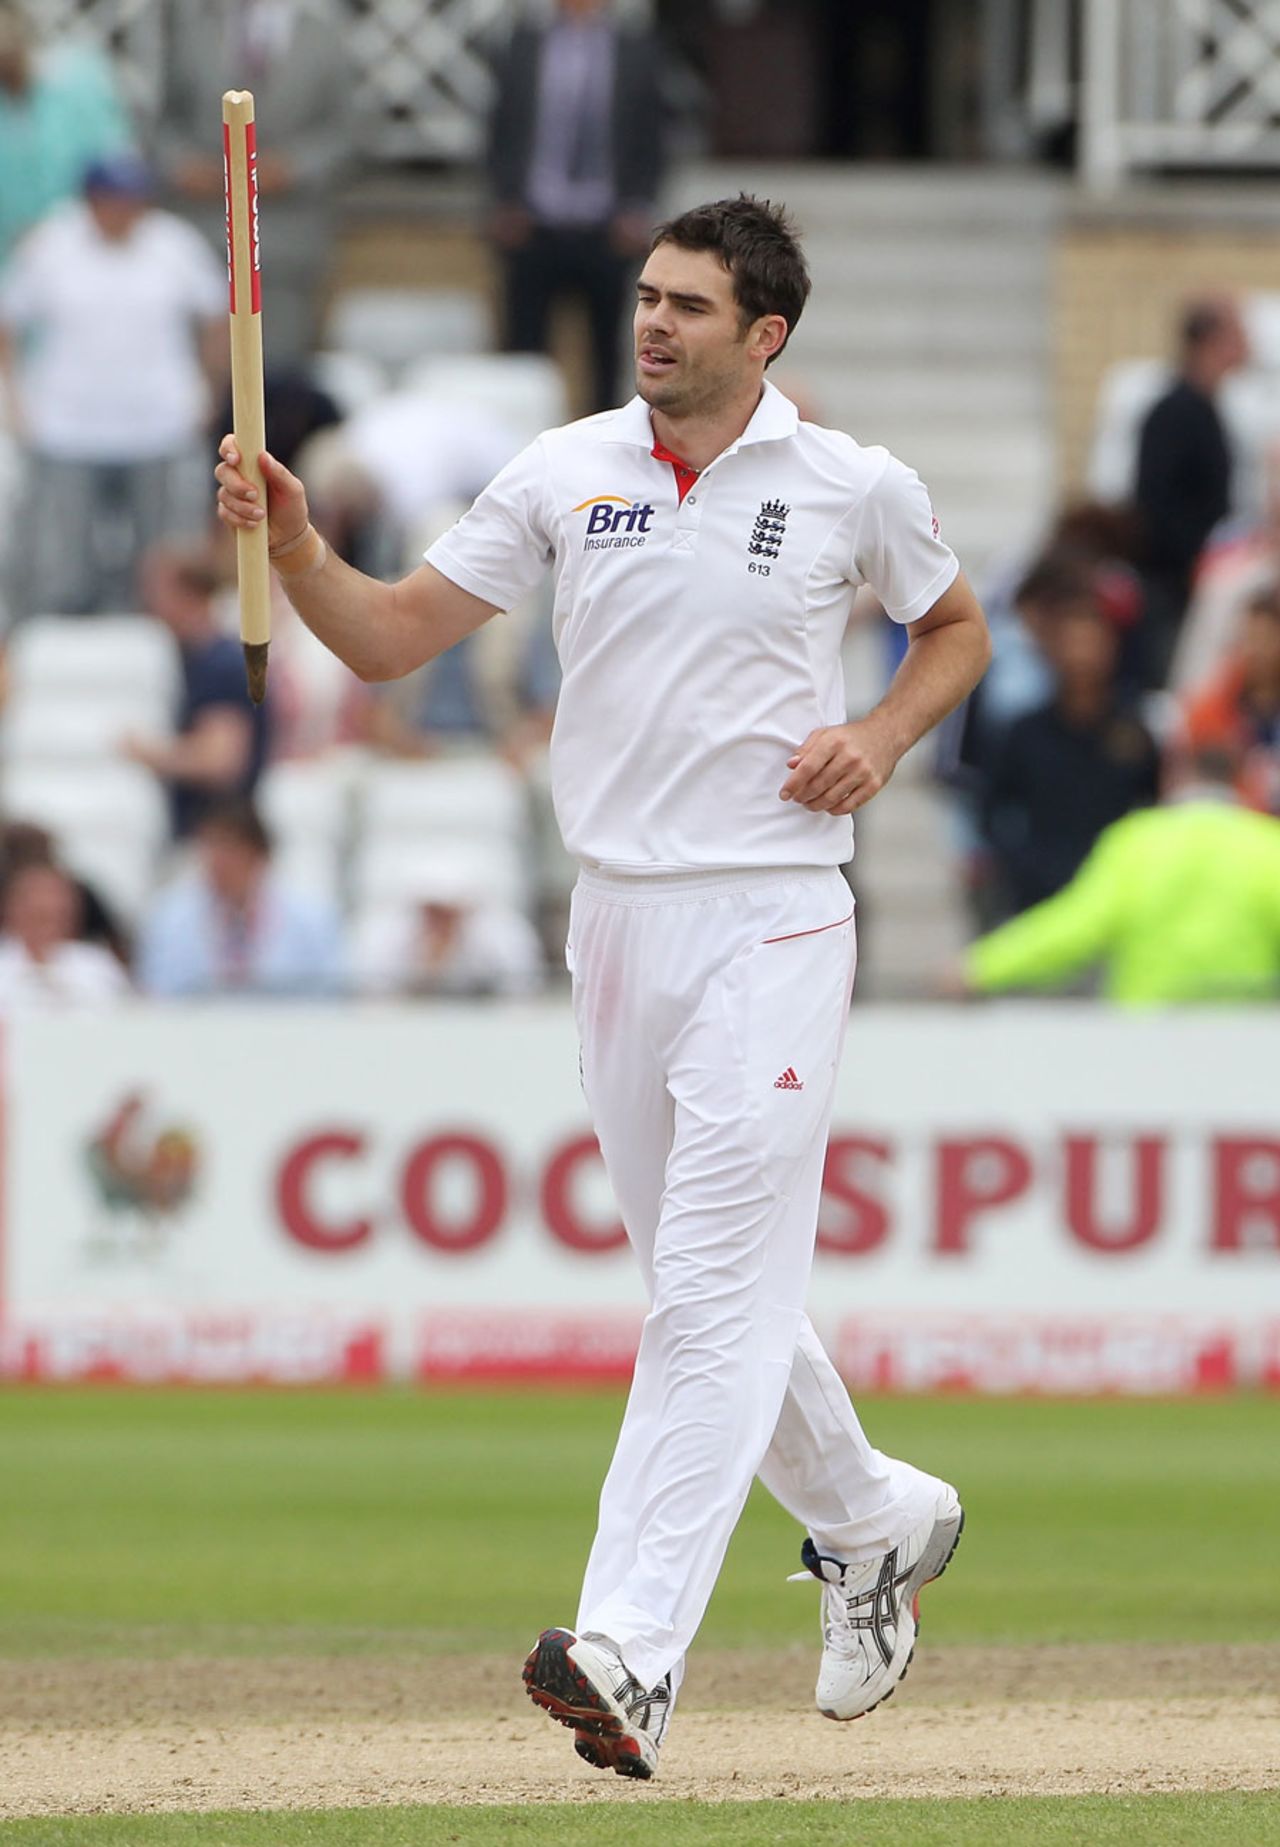 James Anderson collects a stump after taking his 11th wicket and sealing England's win, England v Pakistan, 1st Test, Trent Bridge, 1 August 2010